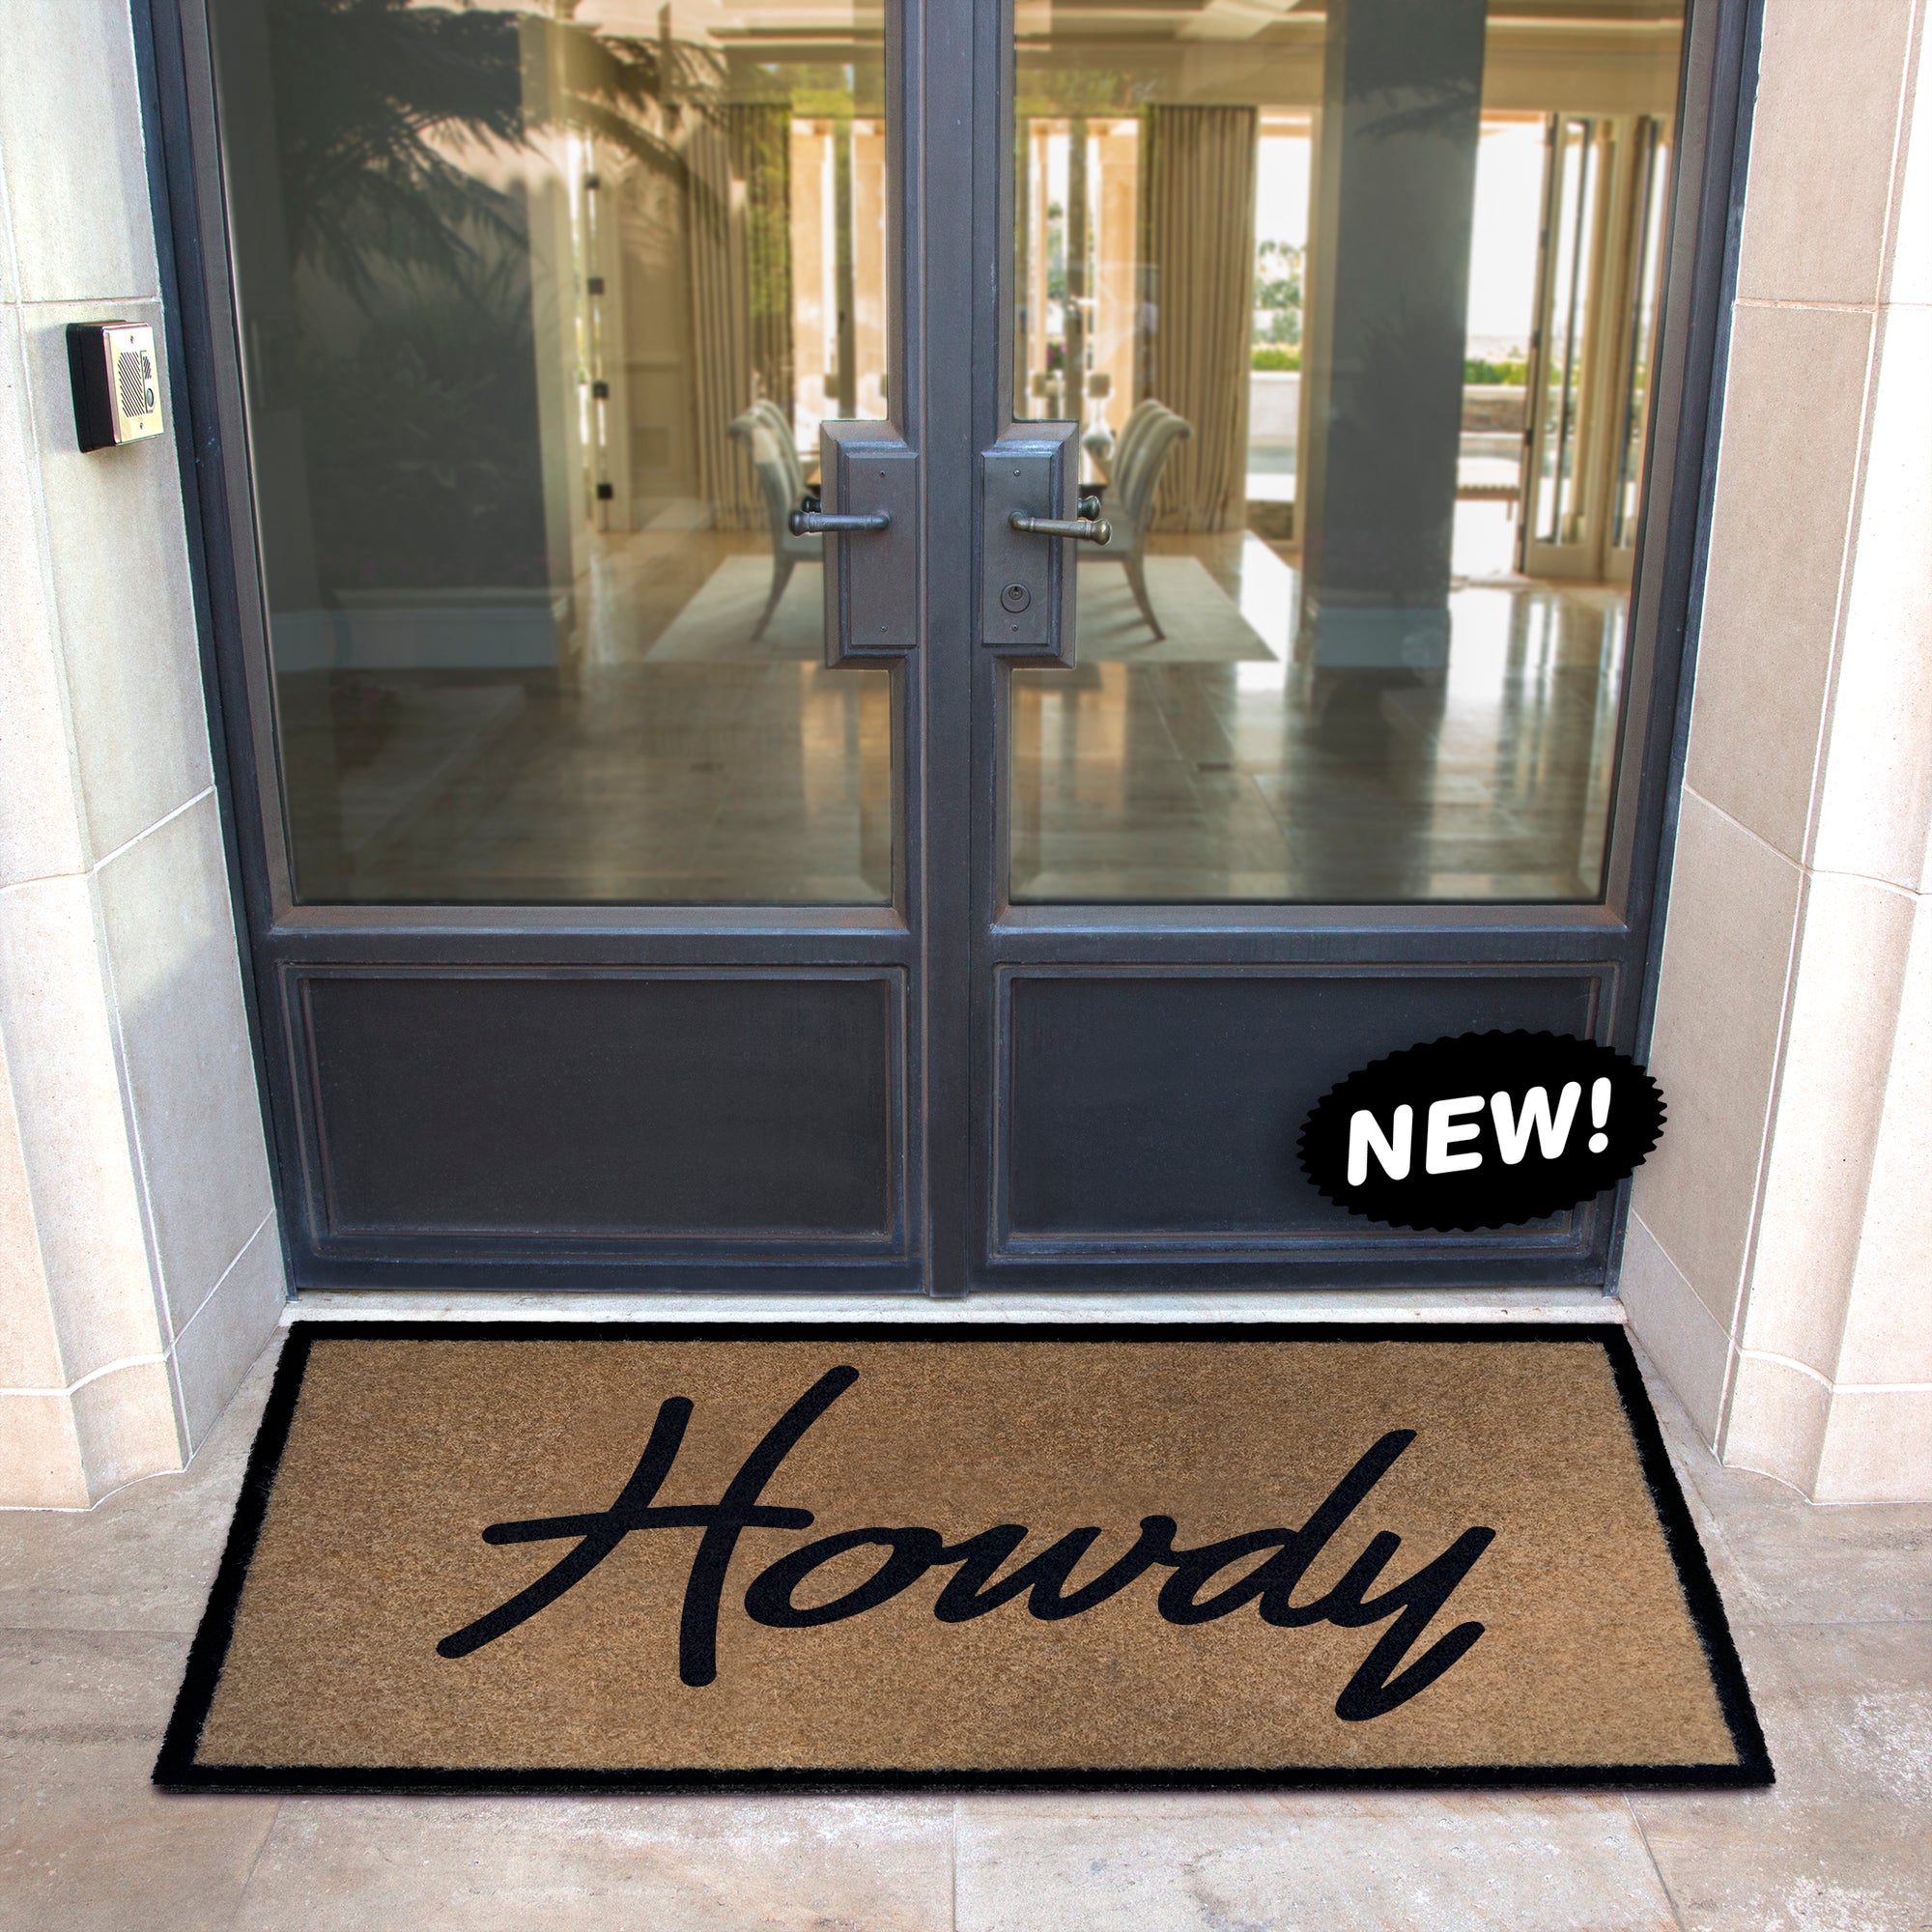 Infinity Custom Mats™ All-Weather Door Mat - STYLE: HOWDY   COLOR: TAN - rugsthatfit.com